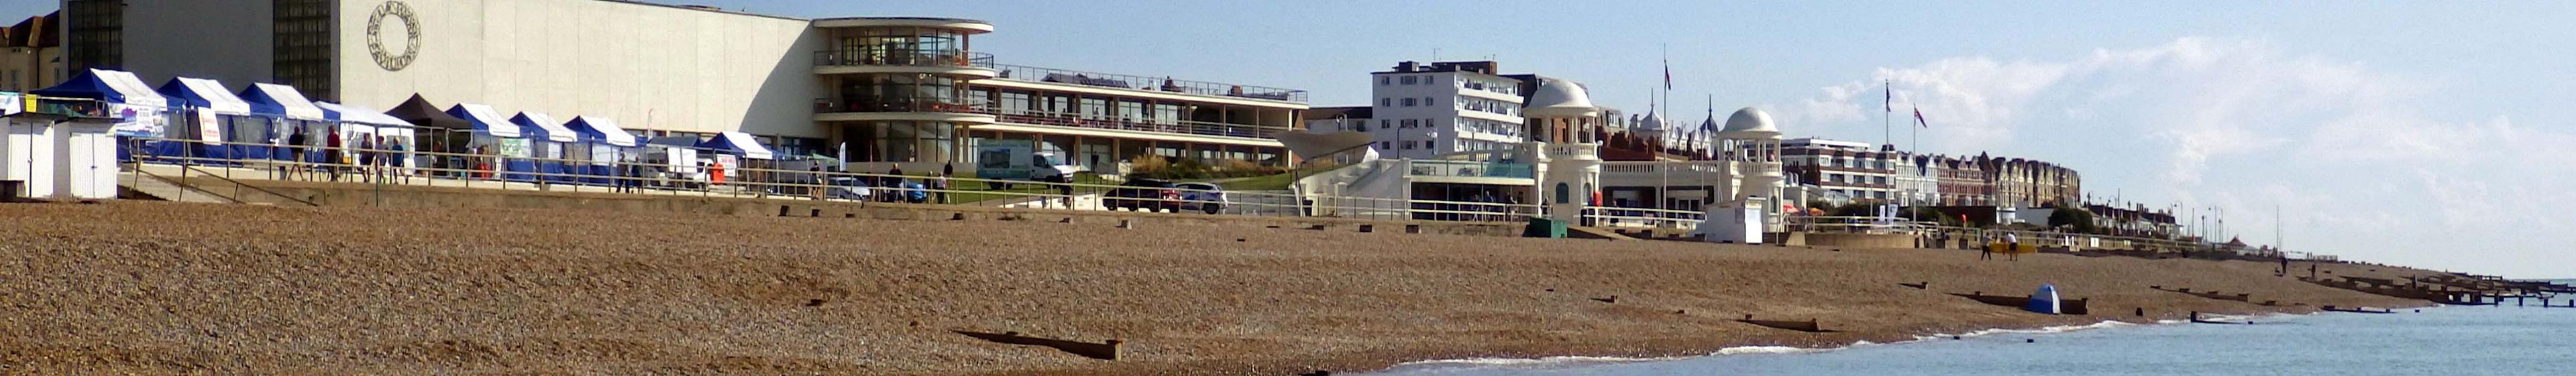 Banner image for Bexhill-on-Sea on GigsGuide